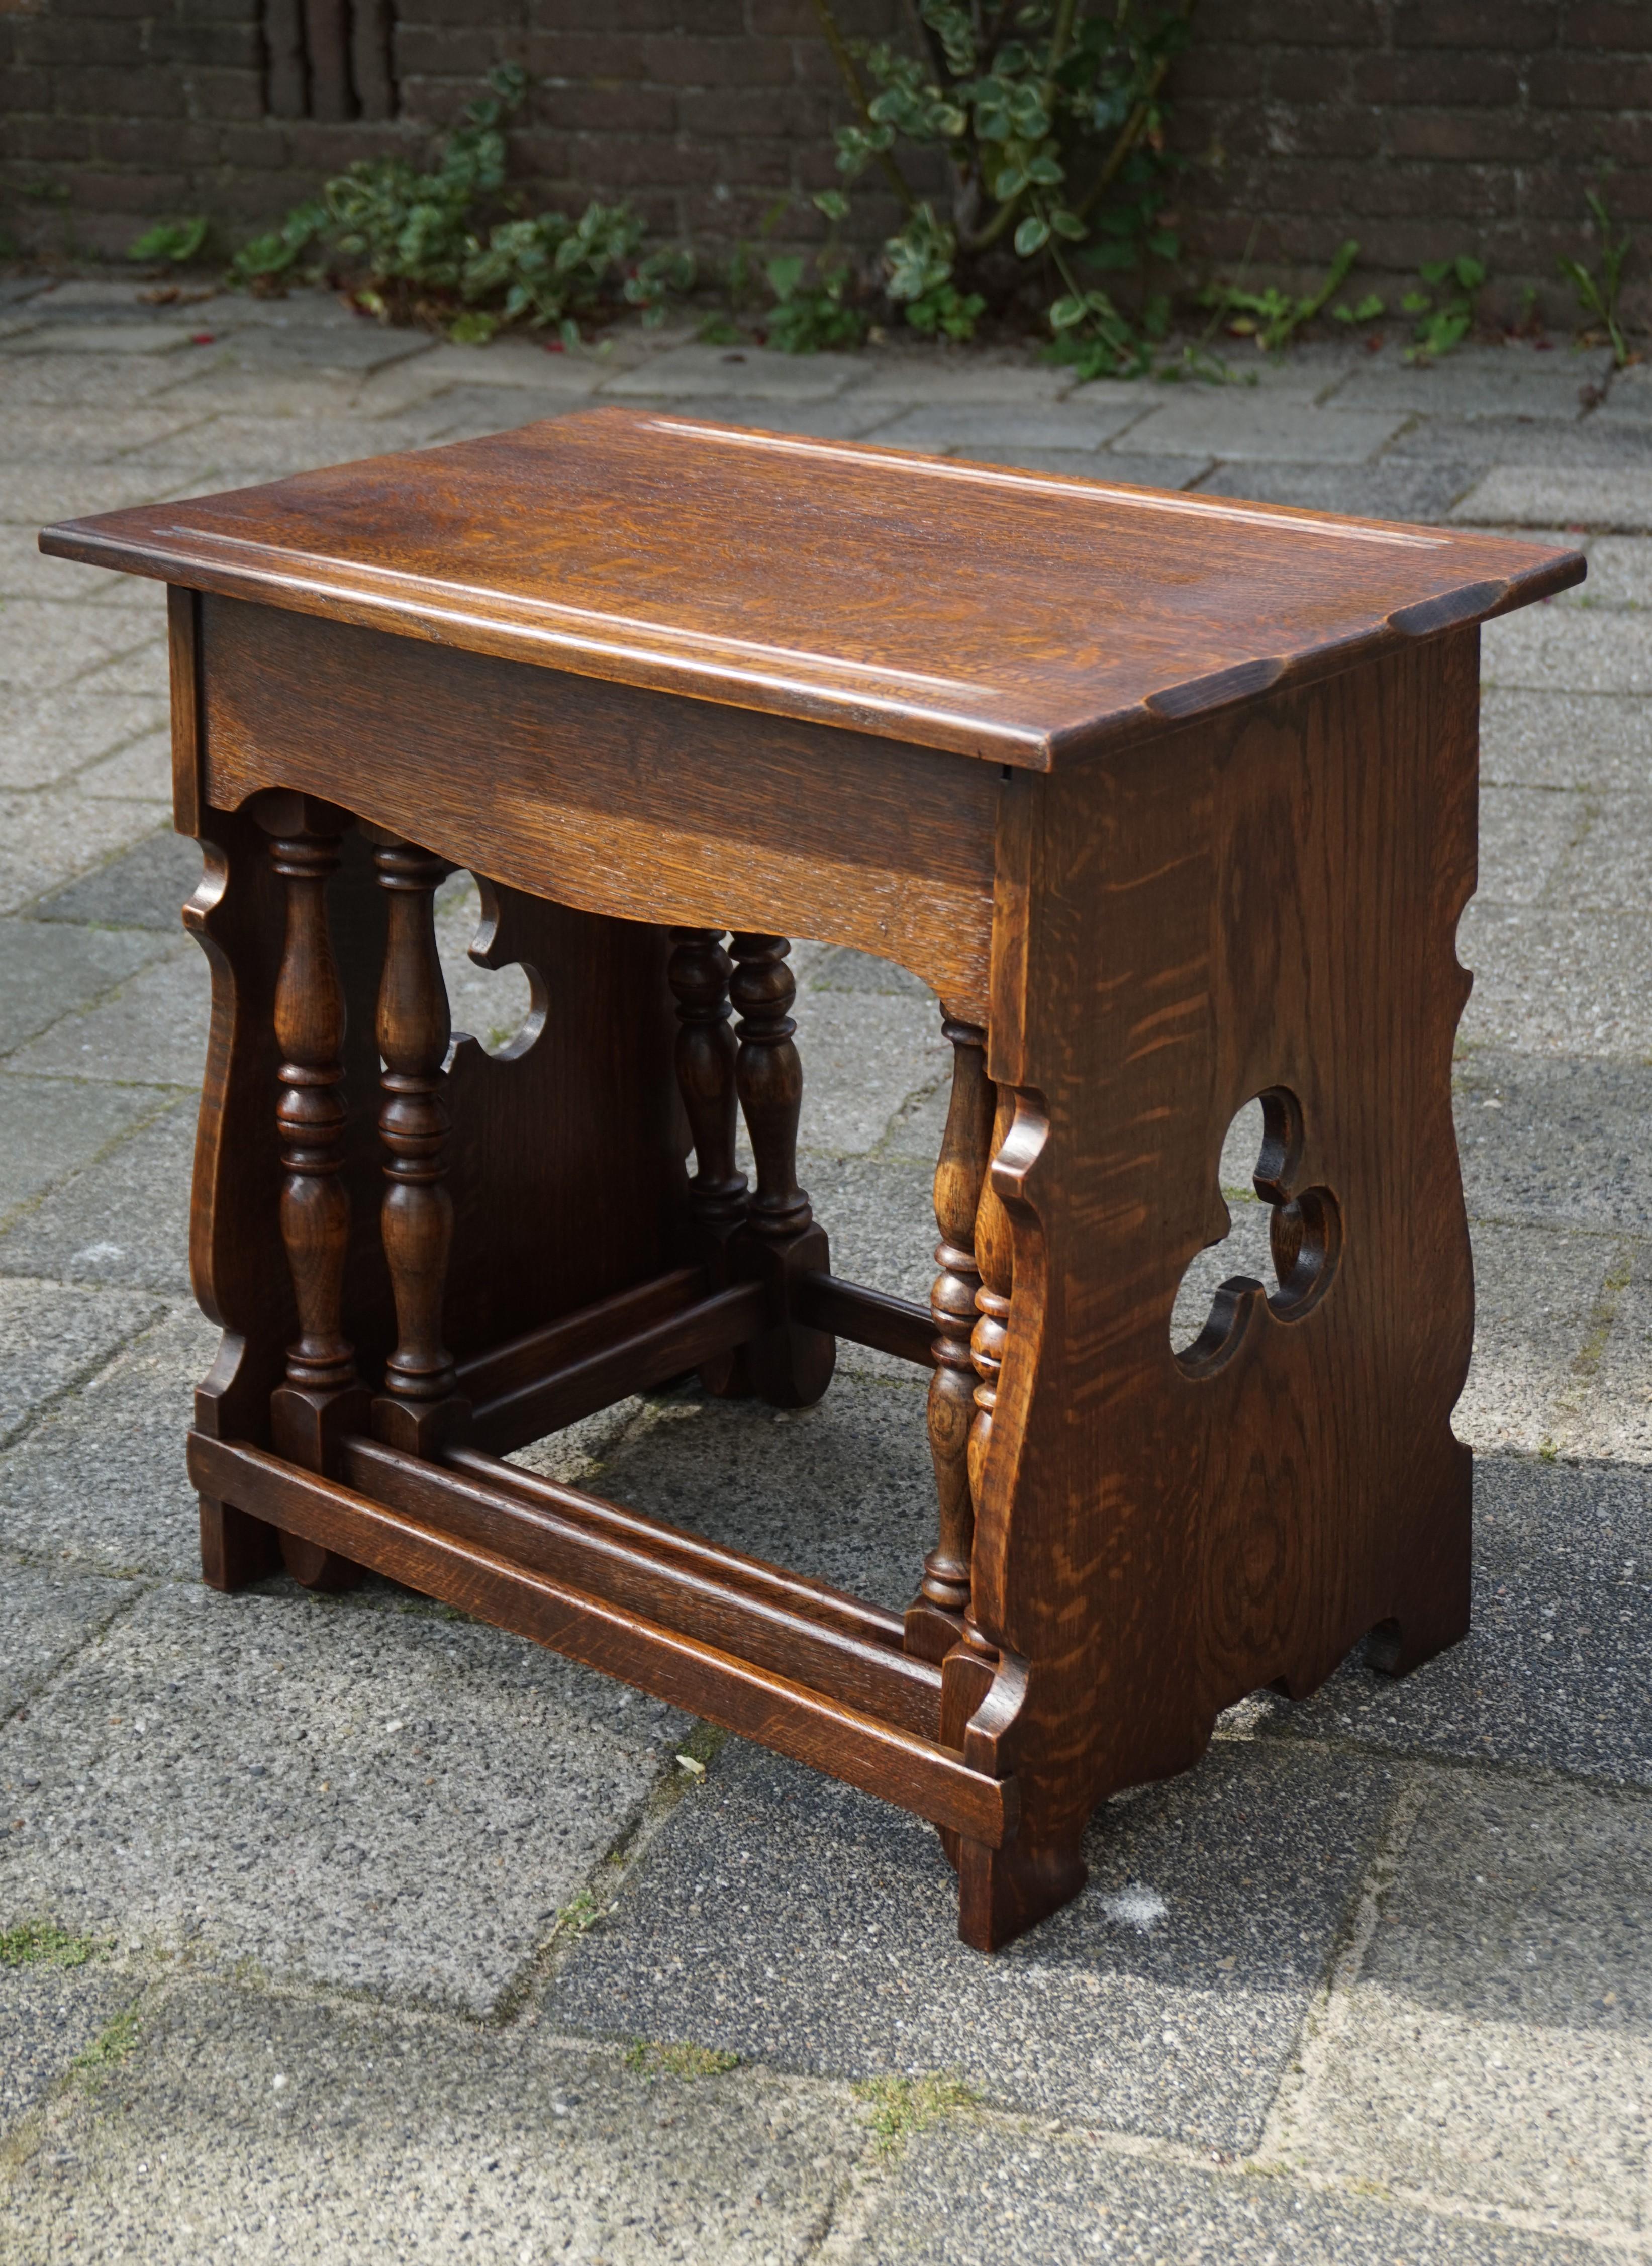 Hand-Crafted Early 20th Century Handcrafted Gothic Revival Nest of Tables from a Monastery